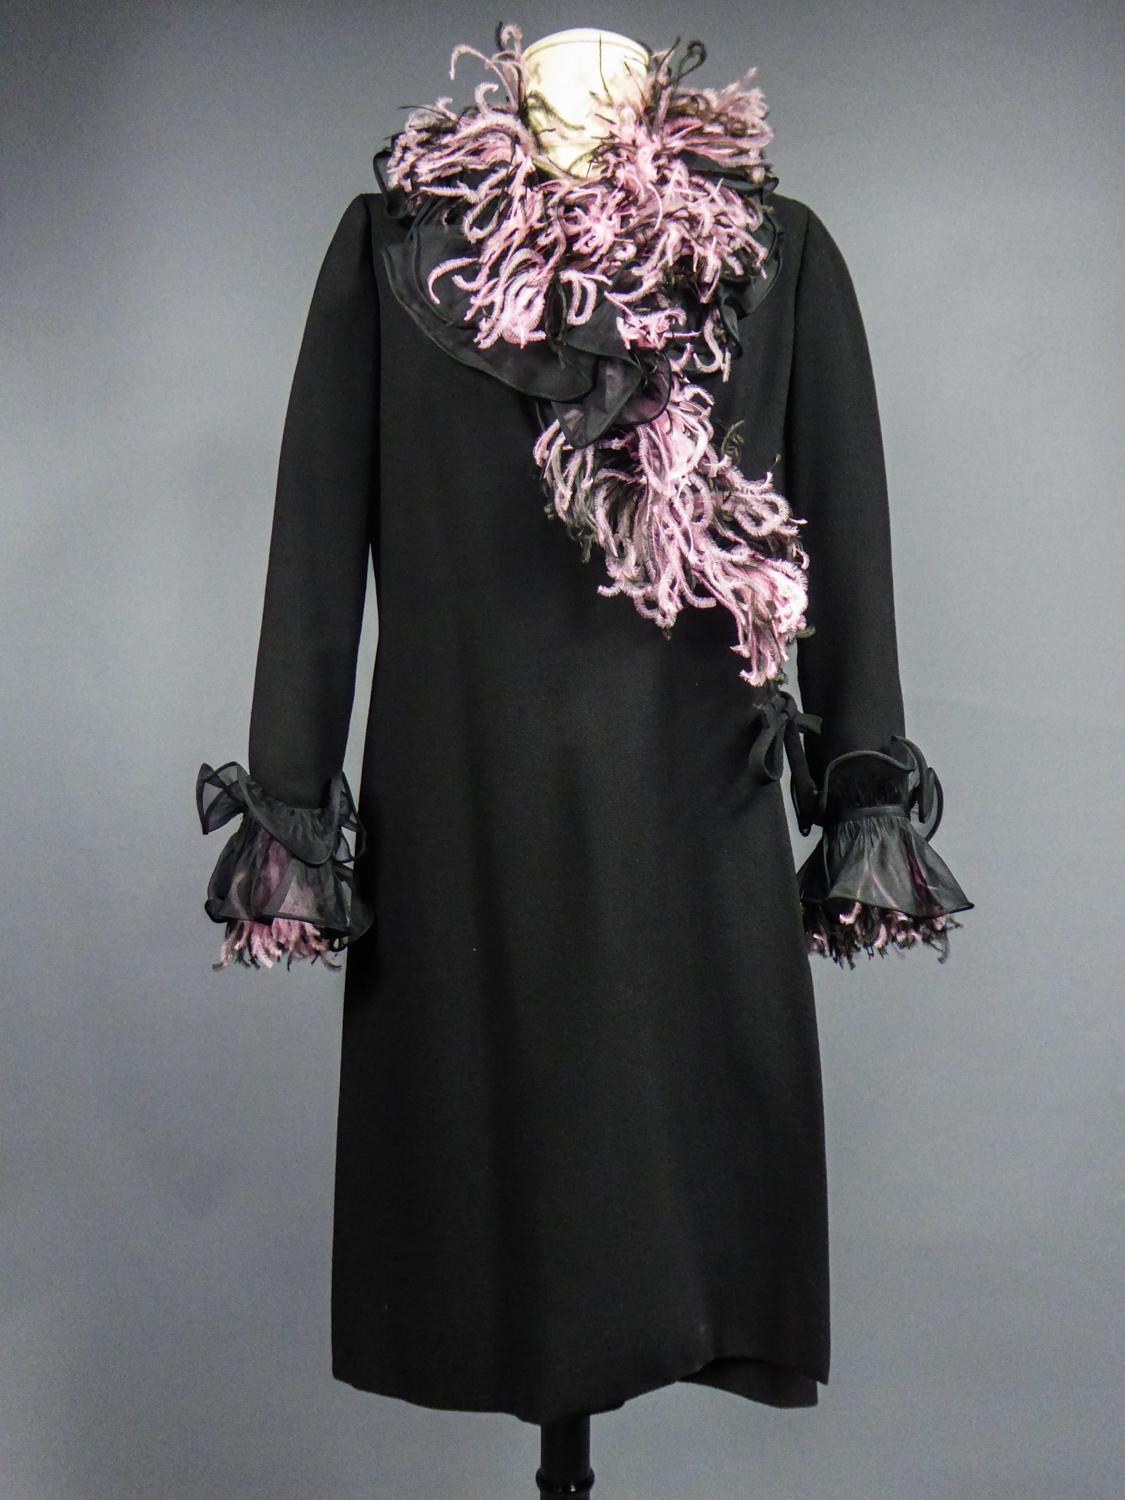 Black An Yves Saint Laurent Haute Couture Coat Dress Numbered 29390 Circa 1970/1980 For Sale